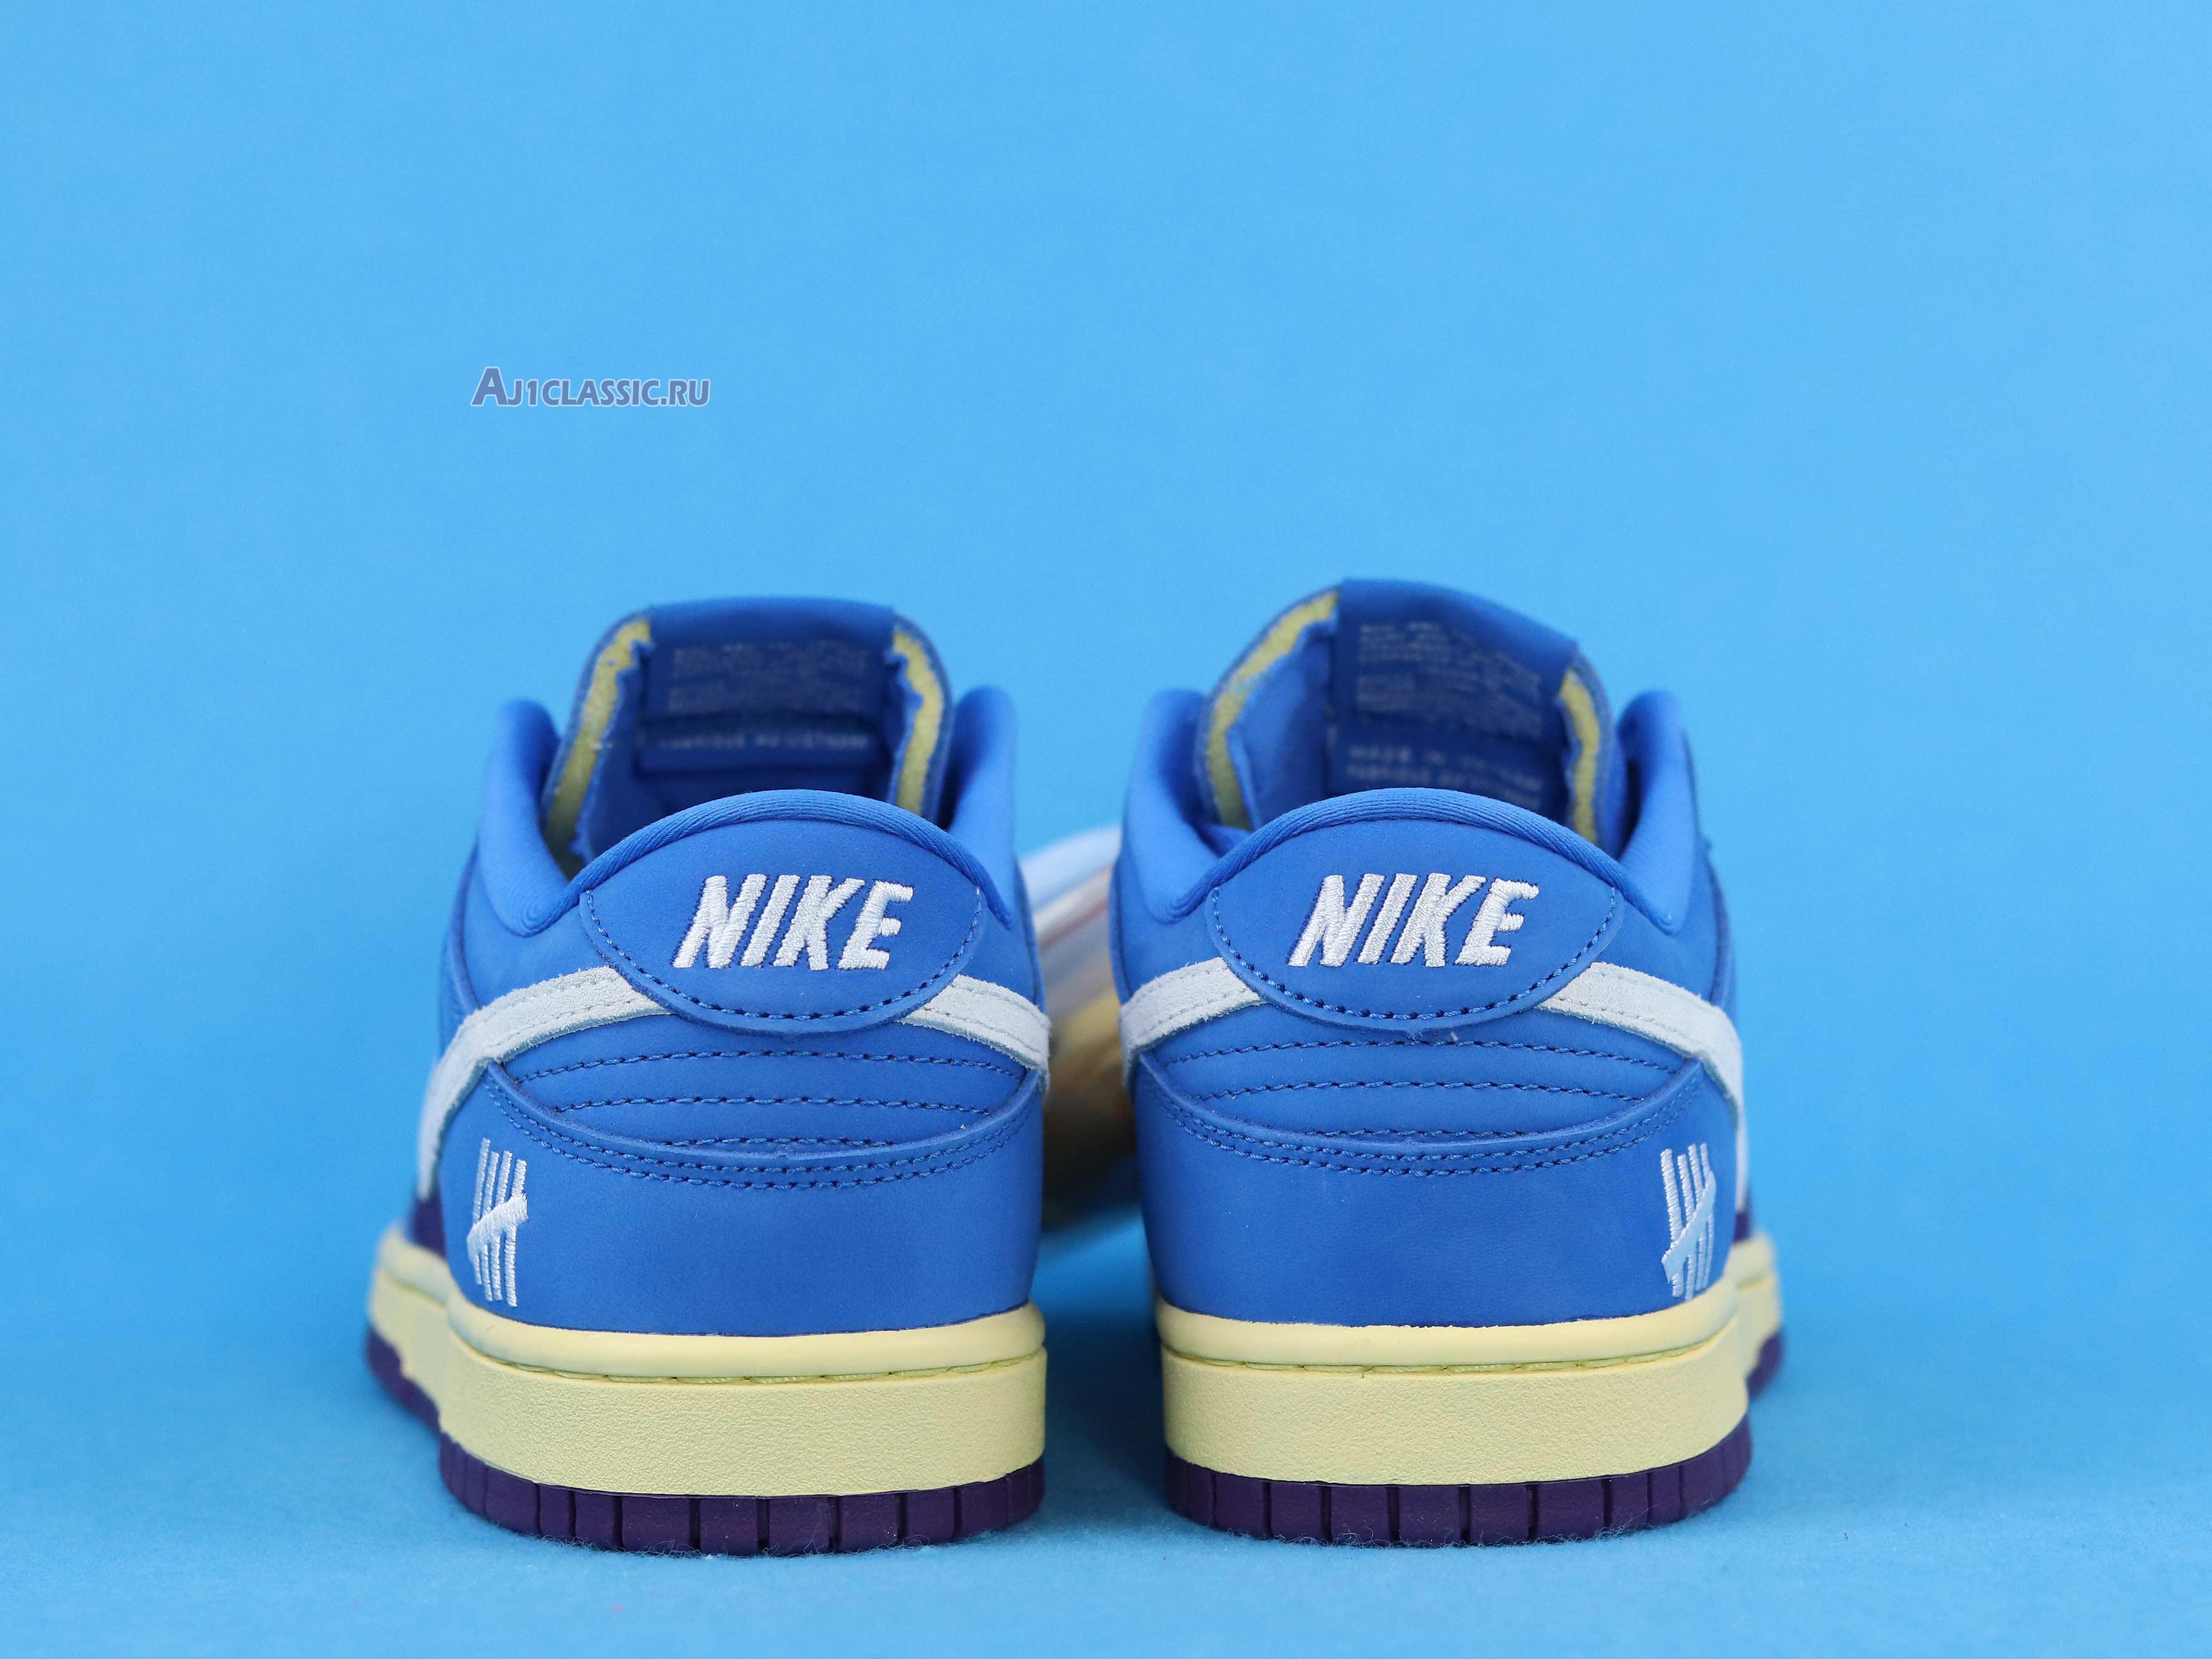 Undefeated x Nike Dunk Low SP "Dunk vs AF1" DH6508-400